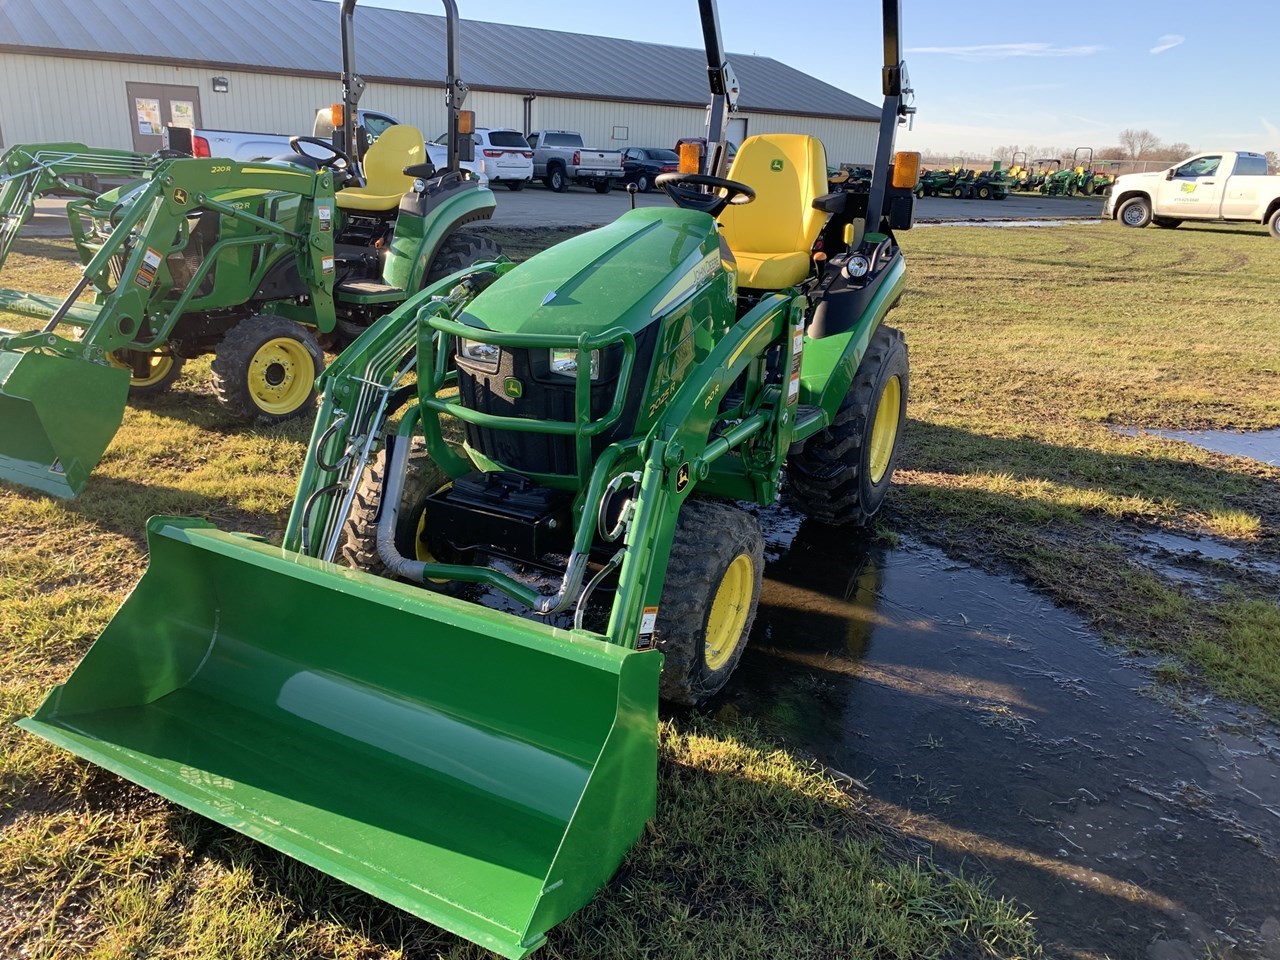 2023 John Deere 2025R Compact Utility Tractor For Sale in Milan Ohio